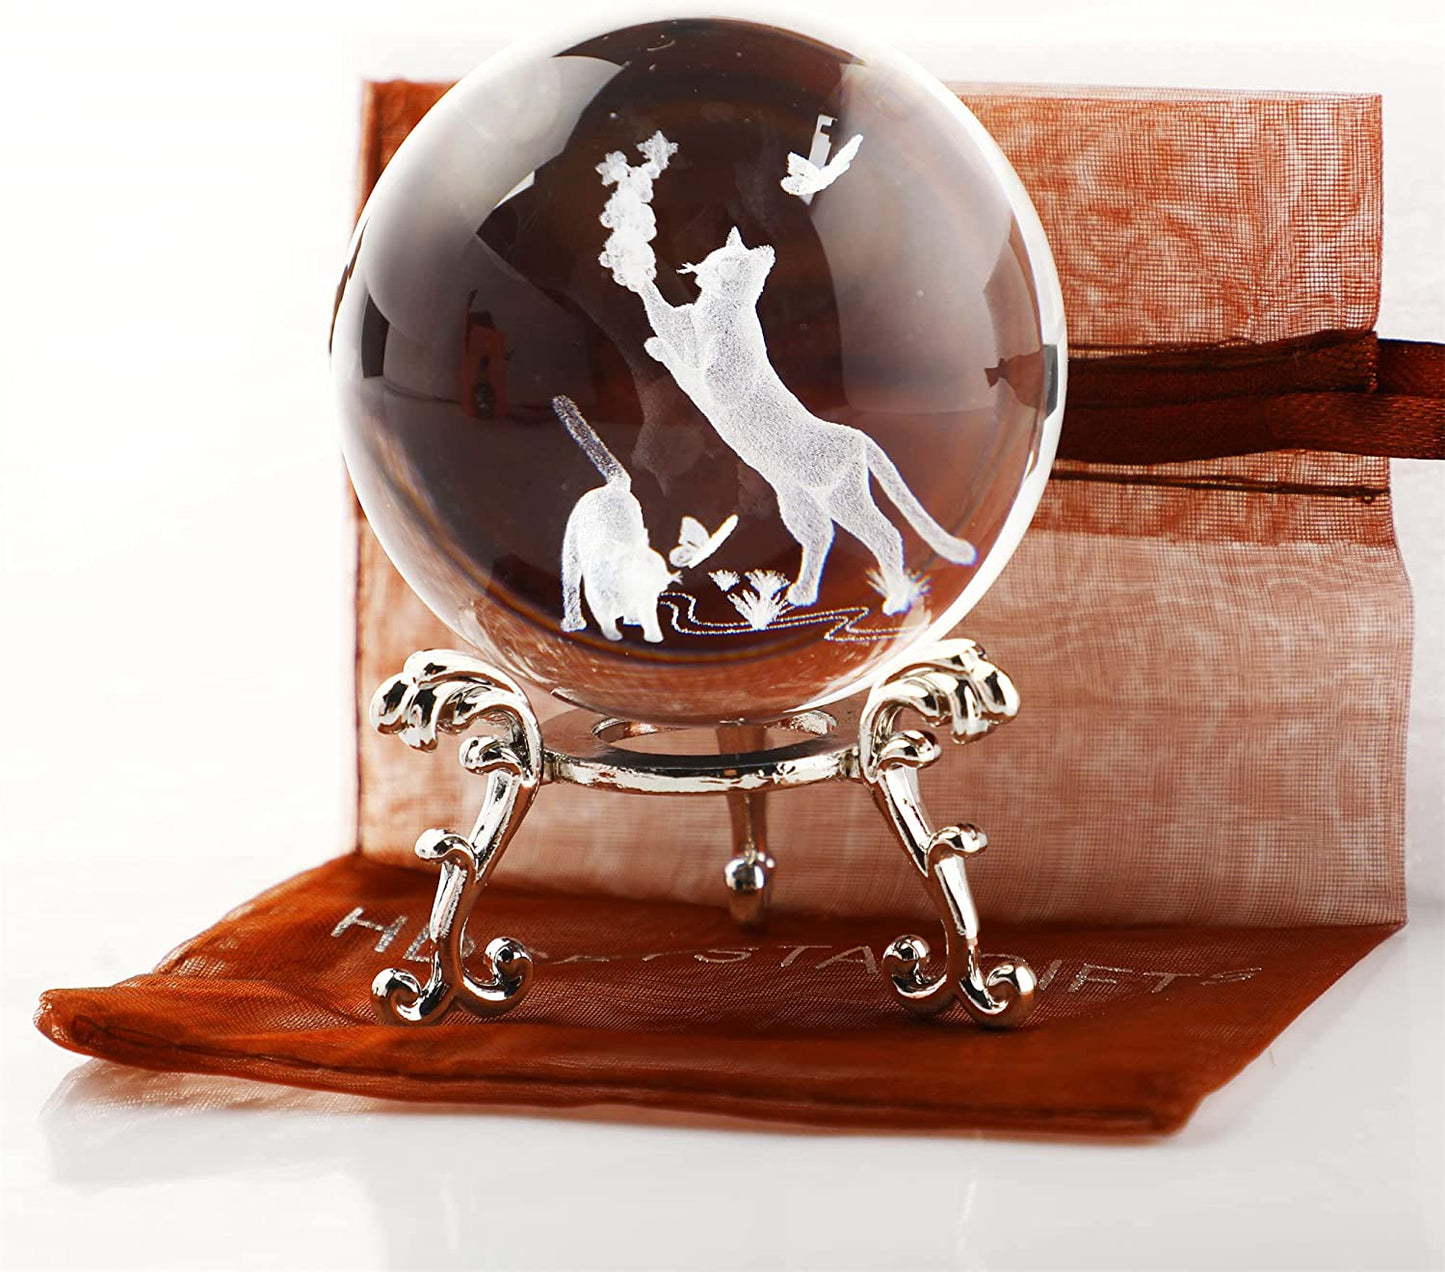 60mm 3D Crystal Ball with Stand Glass Cat Figurine Laser Engraved Cats Sphere Glass Paperweights Crystal 3D Cats with Butterfly Figurine Cat Gift for Cat Lovers Women